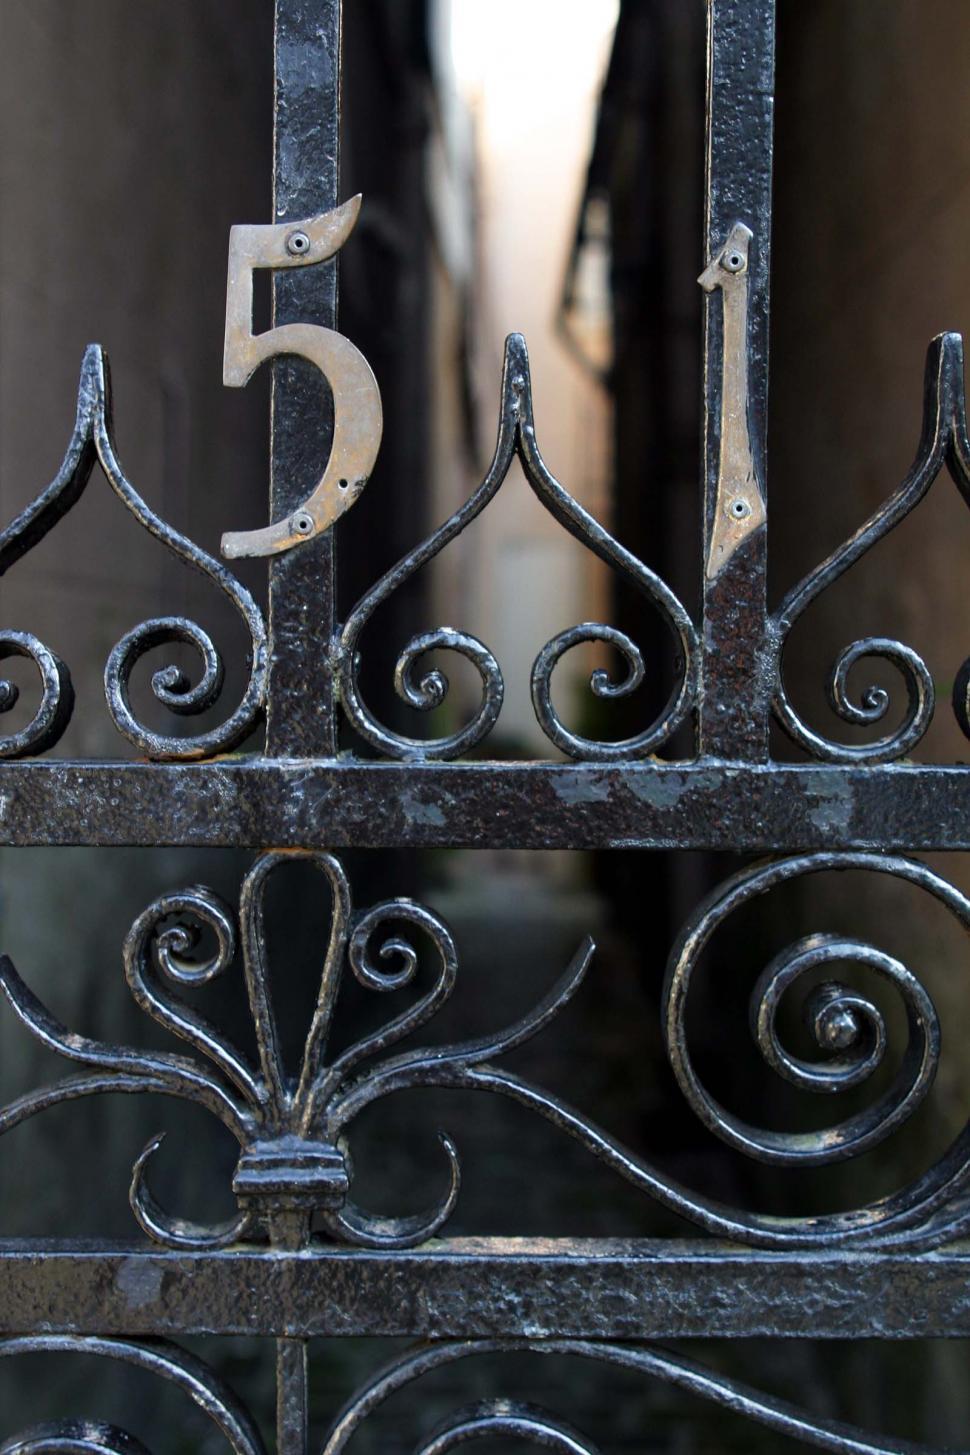 Free Image of gate iron alley numbers address 5 1 scrollwork weld security charleston south carolina 